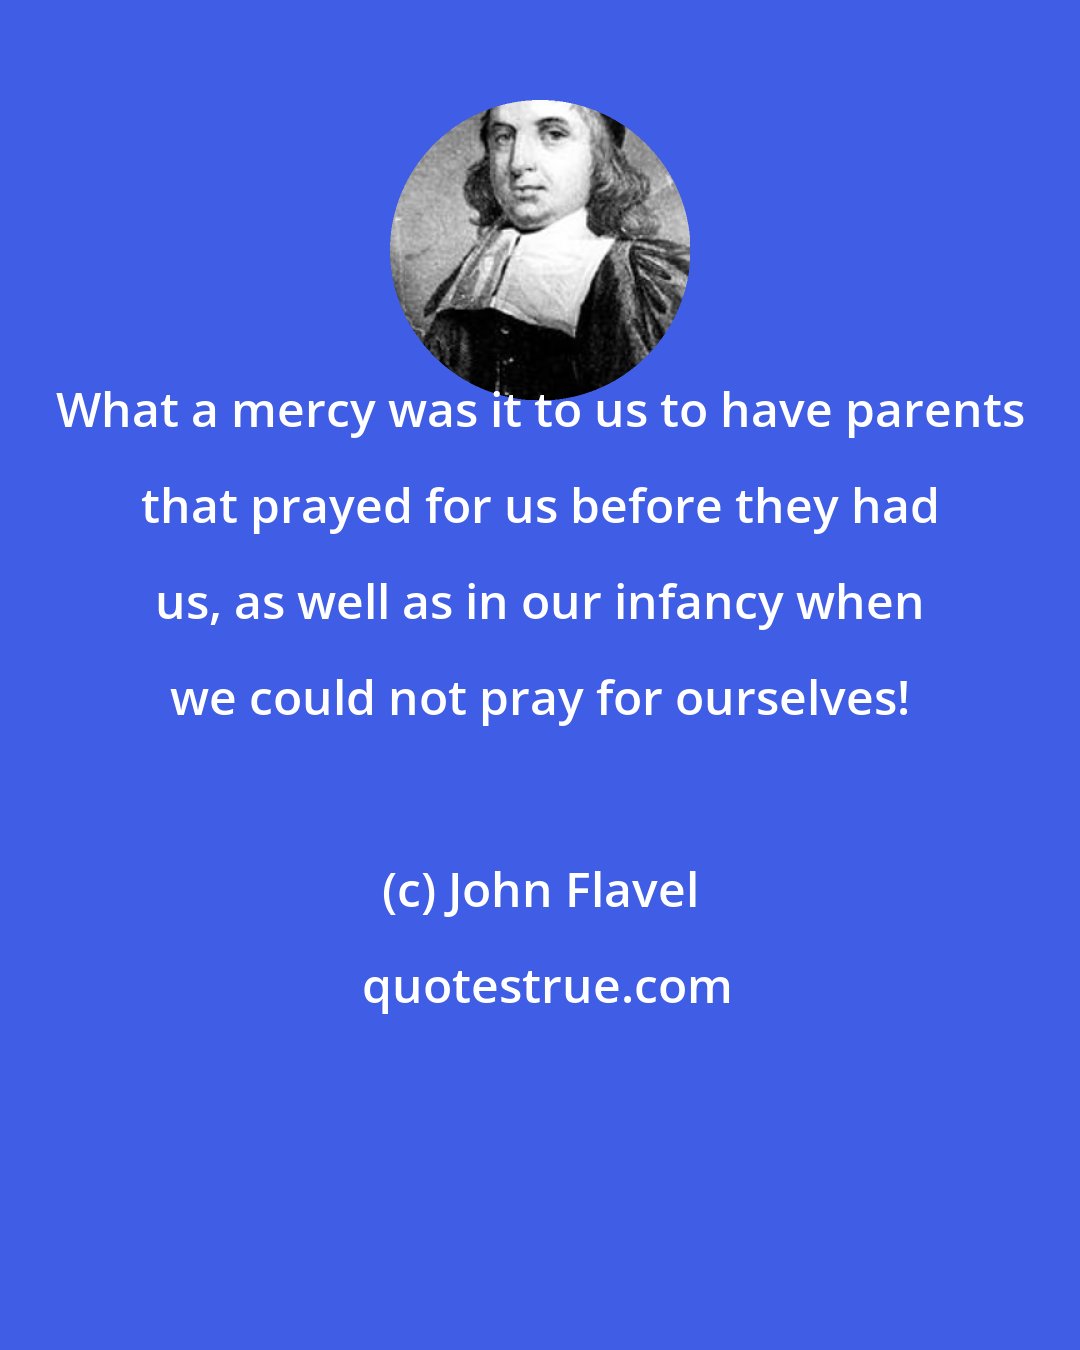 John Flavel: What a mercy was it to us to have parents that prayed for us before they had us, as well as in our infancy when we could not pray for ourselves!